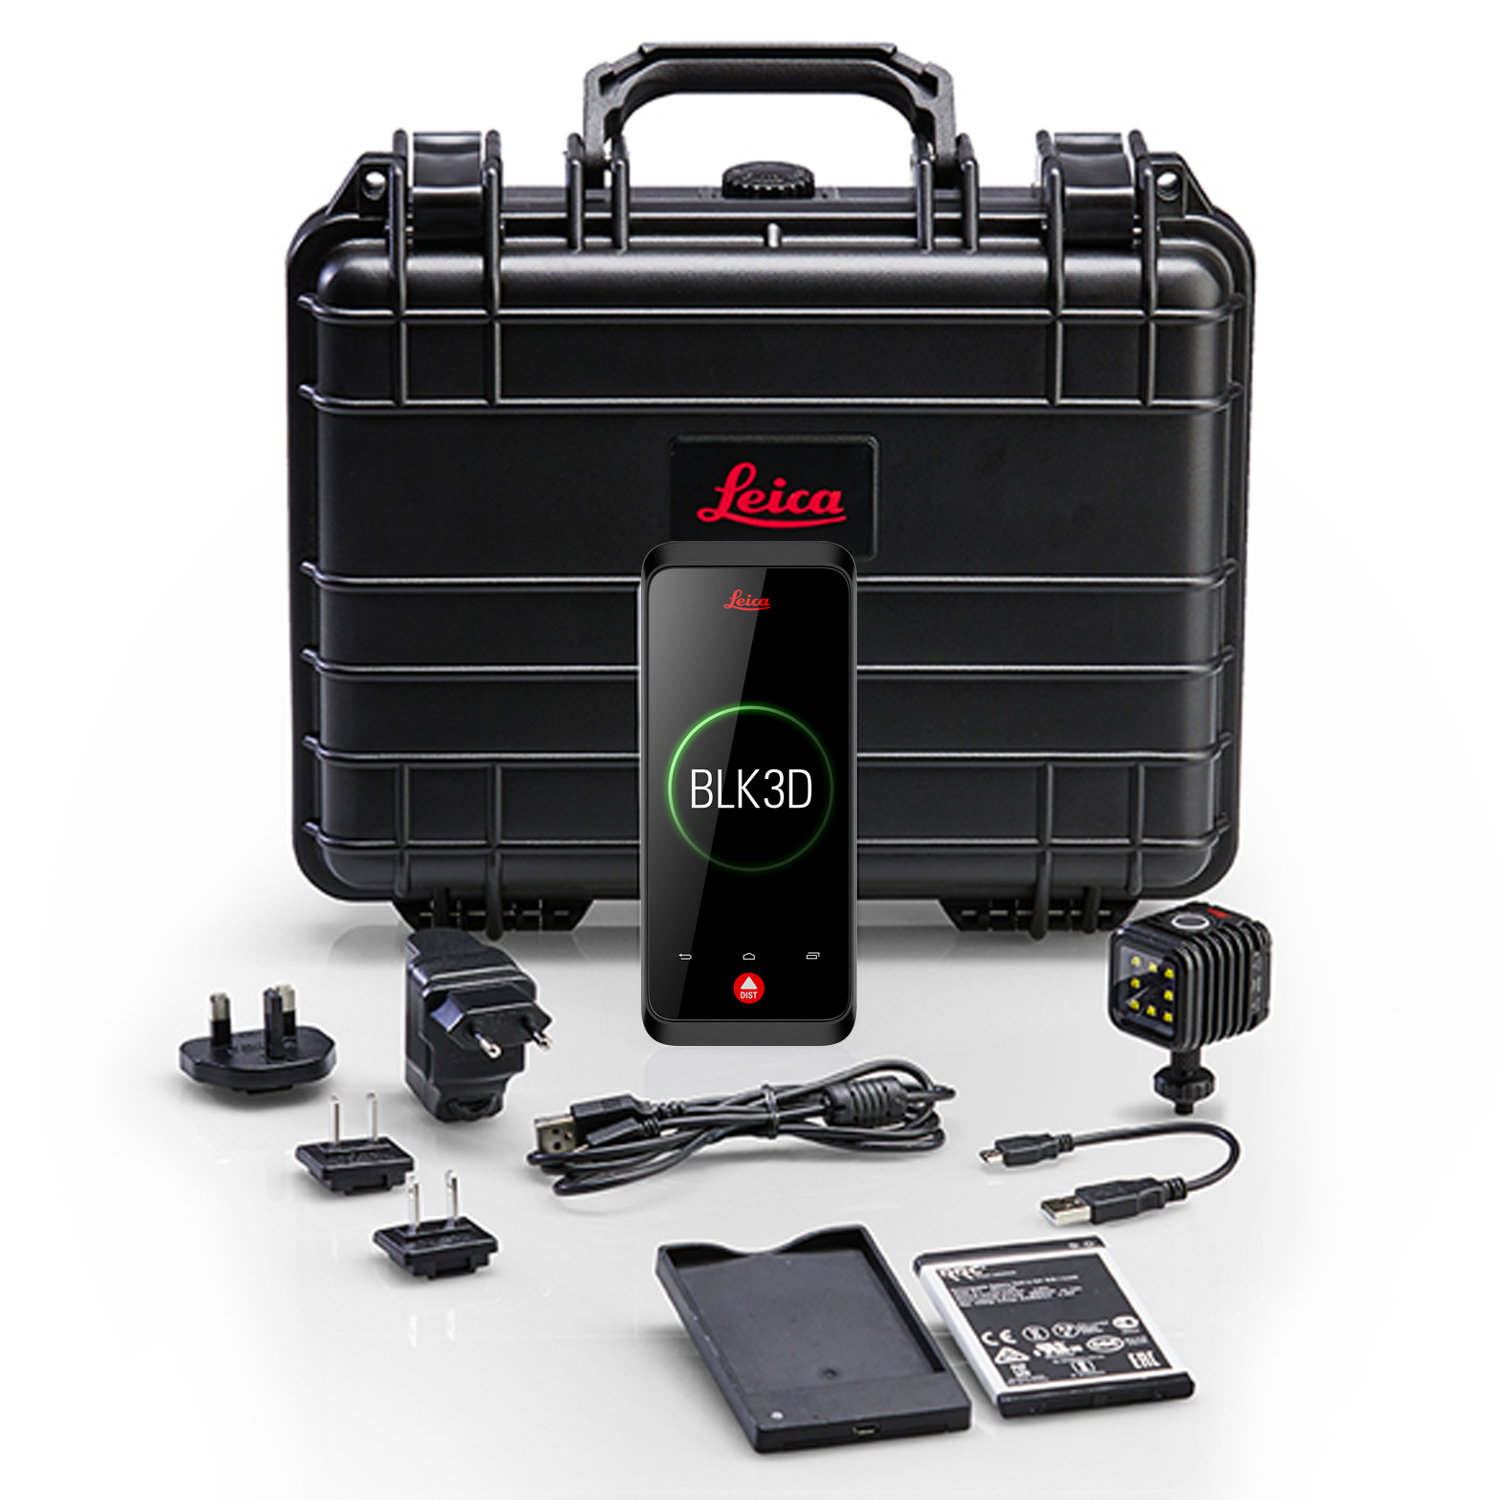 Leica BLK3D - Scope of Delivery